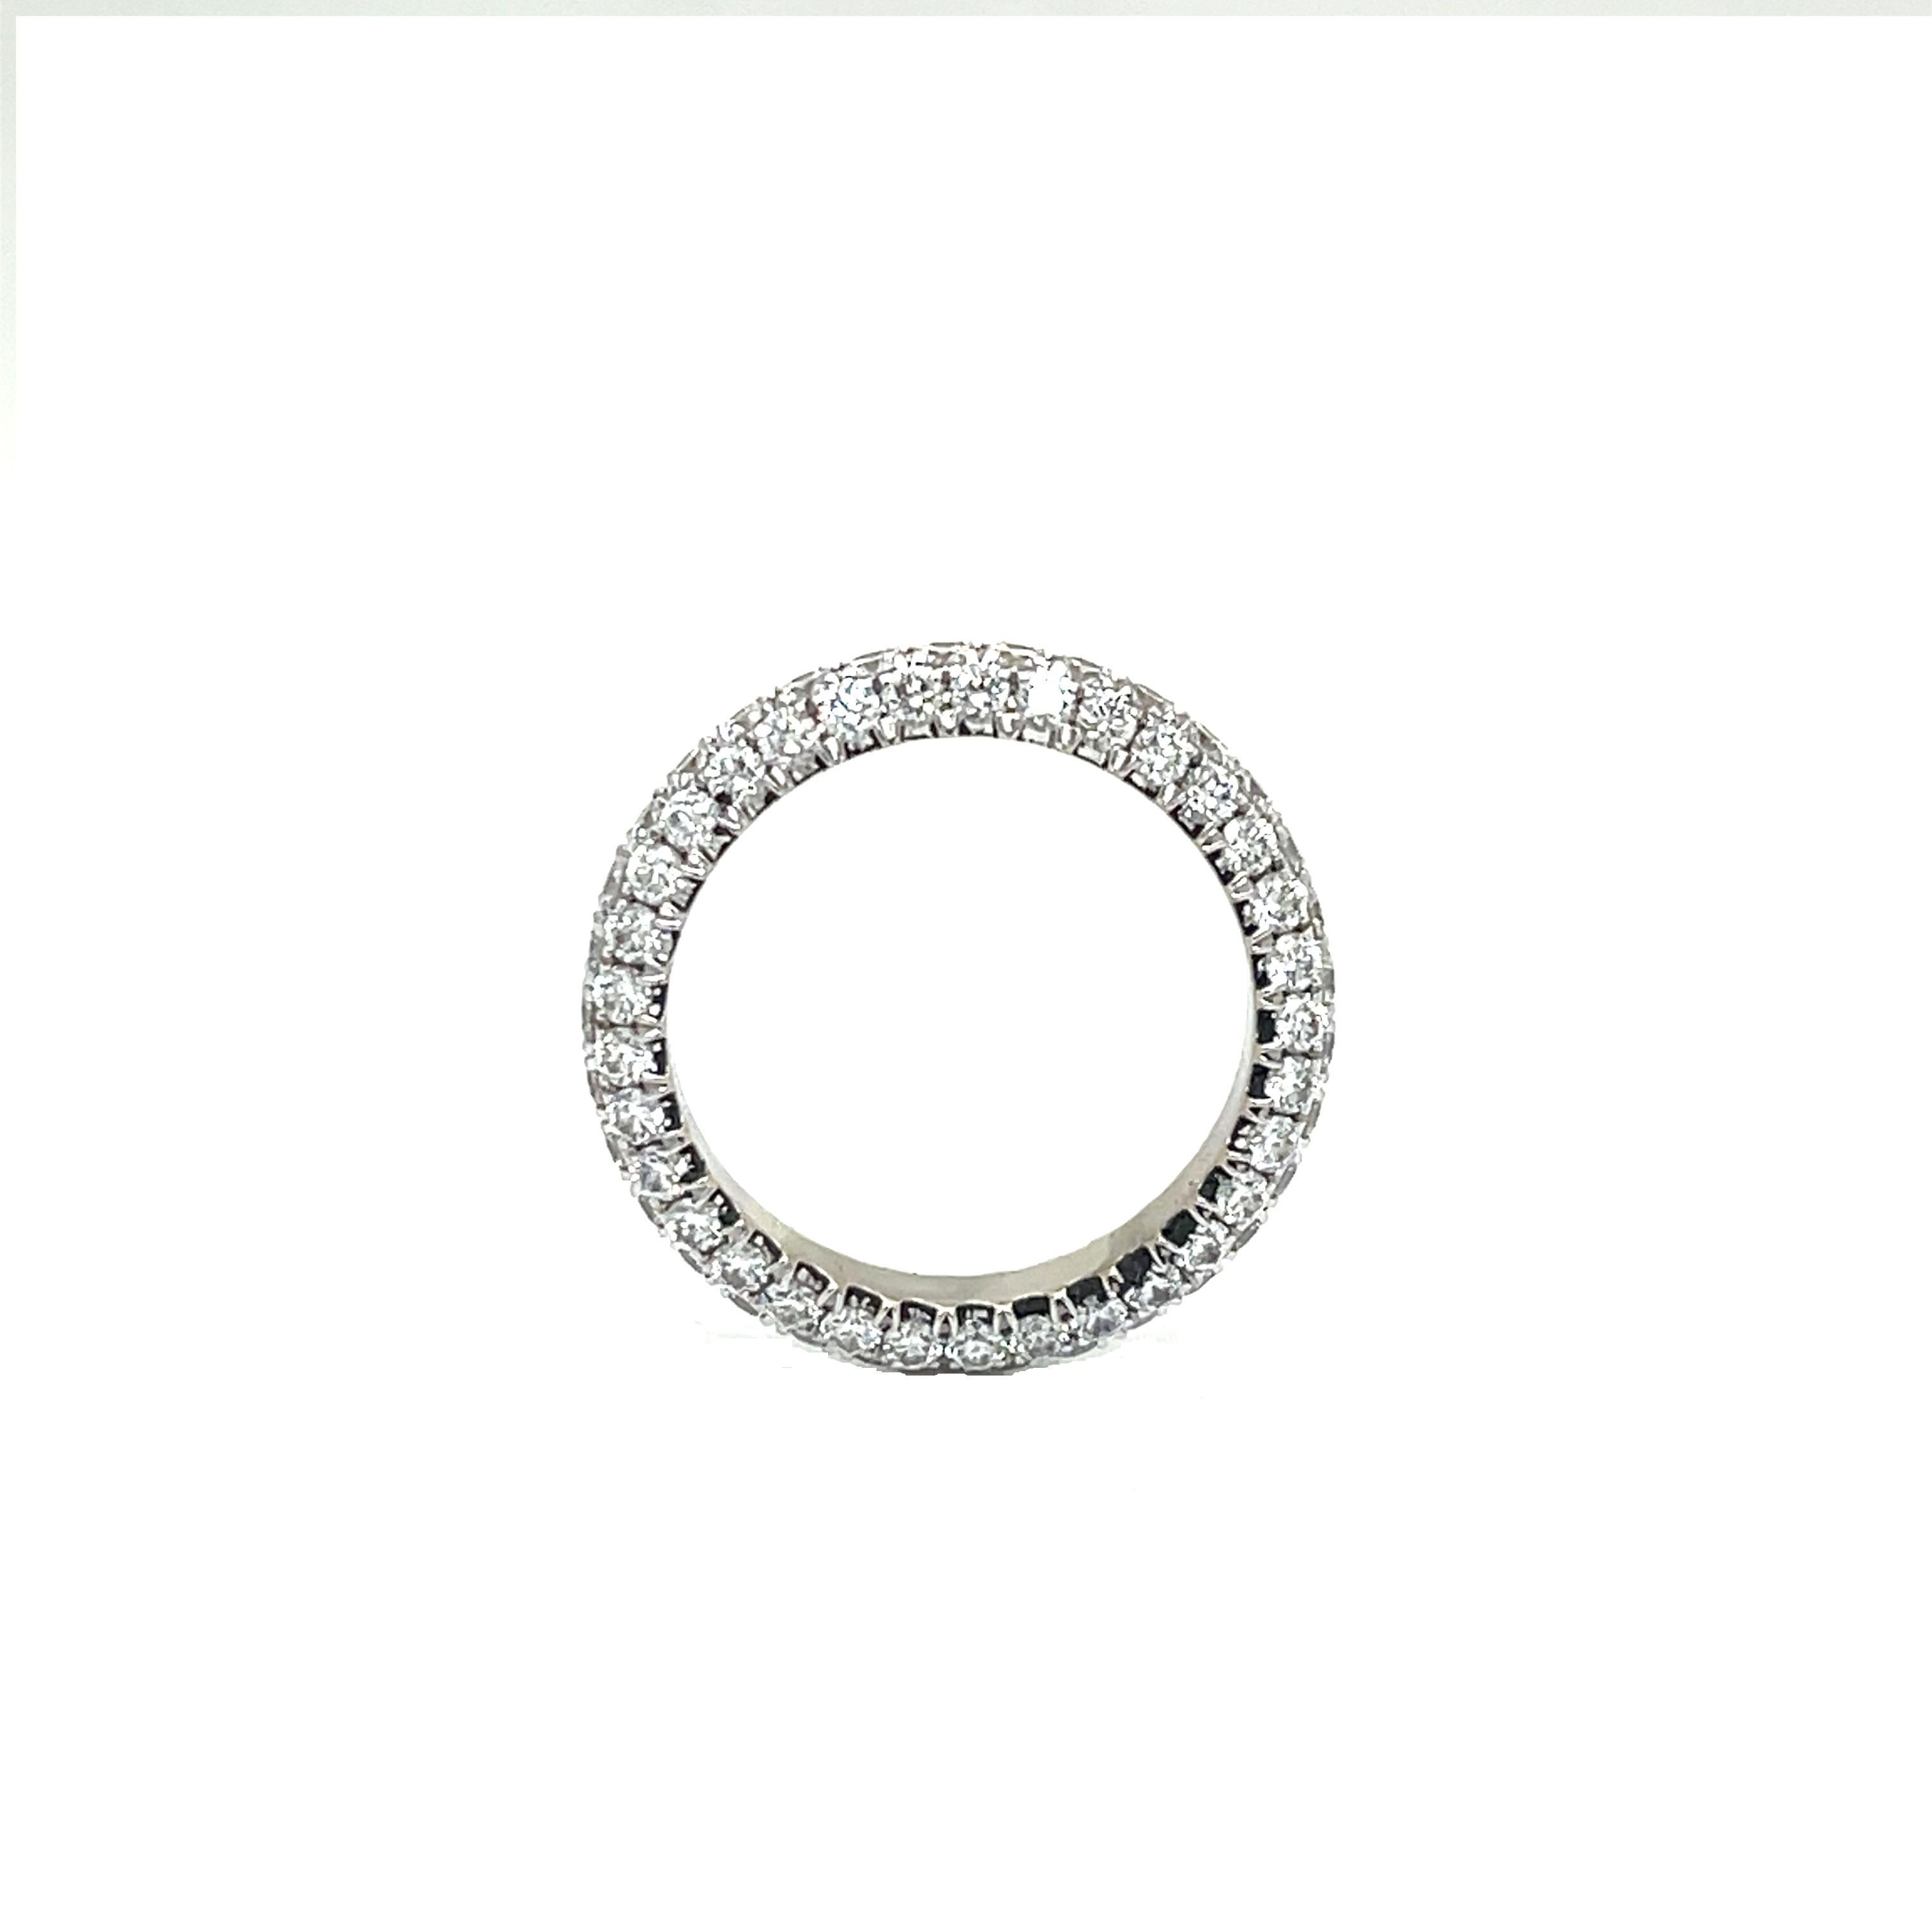 18KW 3 ROW WEDDING BAND WITH DIAMONDS
Metal: 18K White Gold
Diamond Info: G SI, 99 Round Brilliant Diamonds 
Total Diamond Weight: 2.23 cwt.
Item Weight:  3.58 gm 
Ring Size:   6 (Not re-sizable)
Measurements:  3.65 mm Width
*** All products from